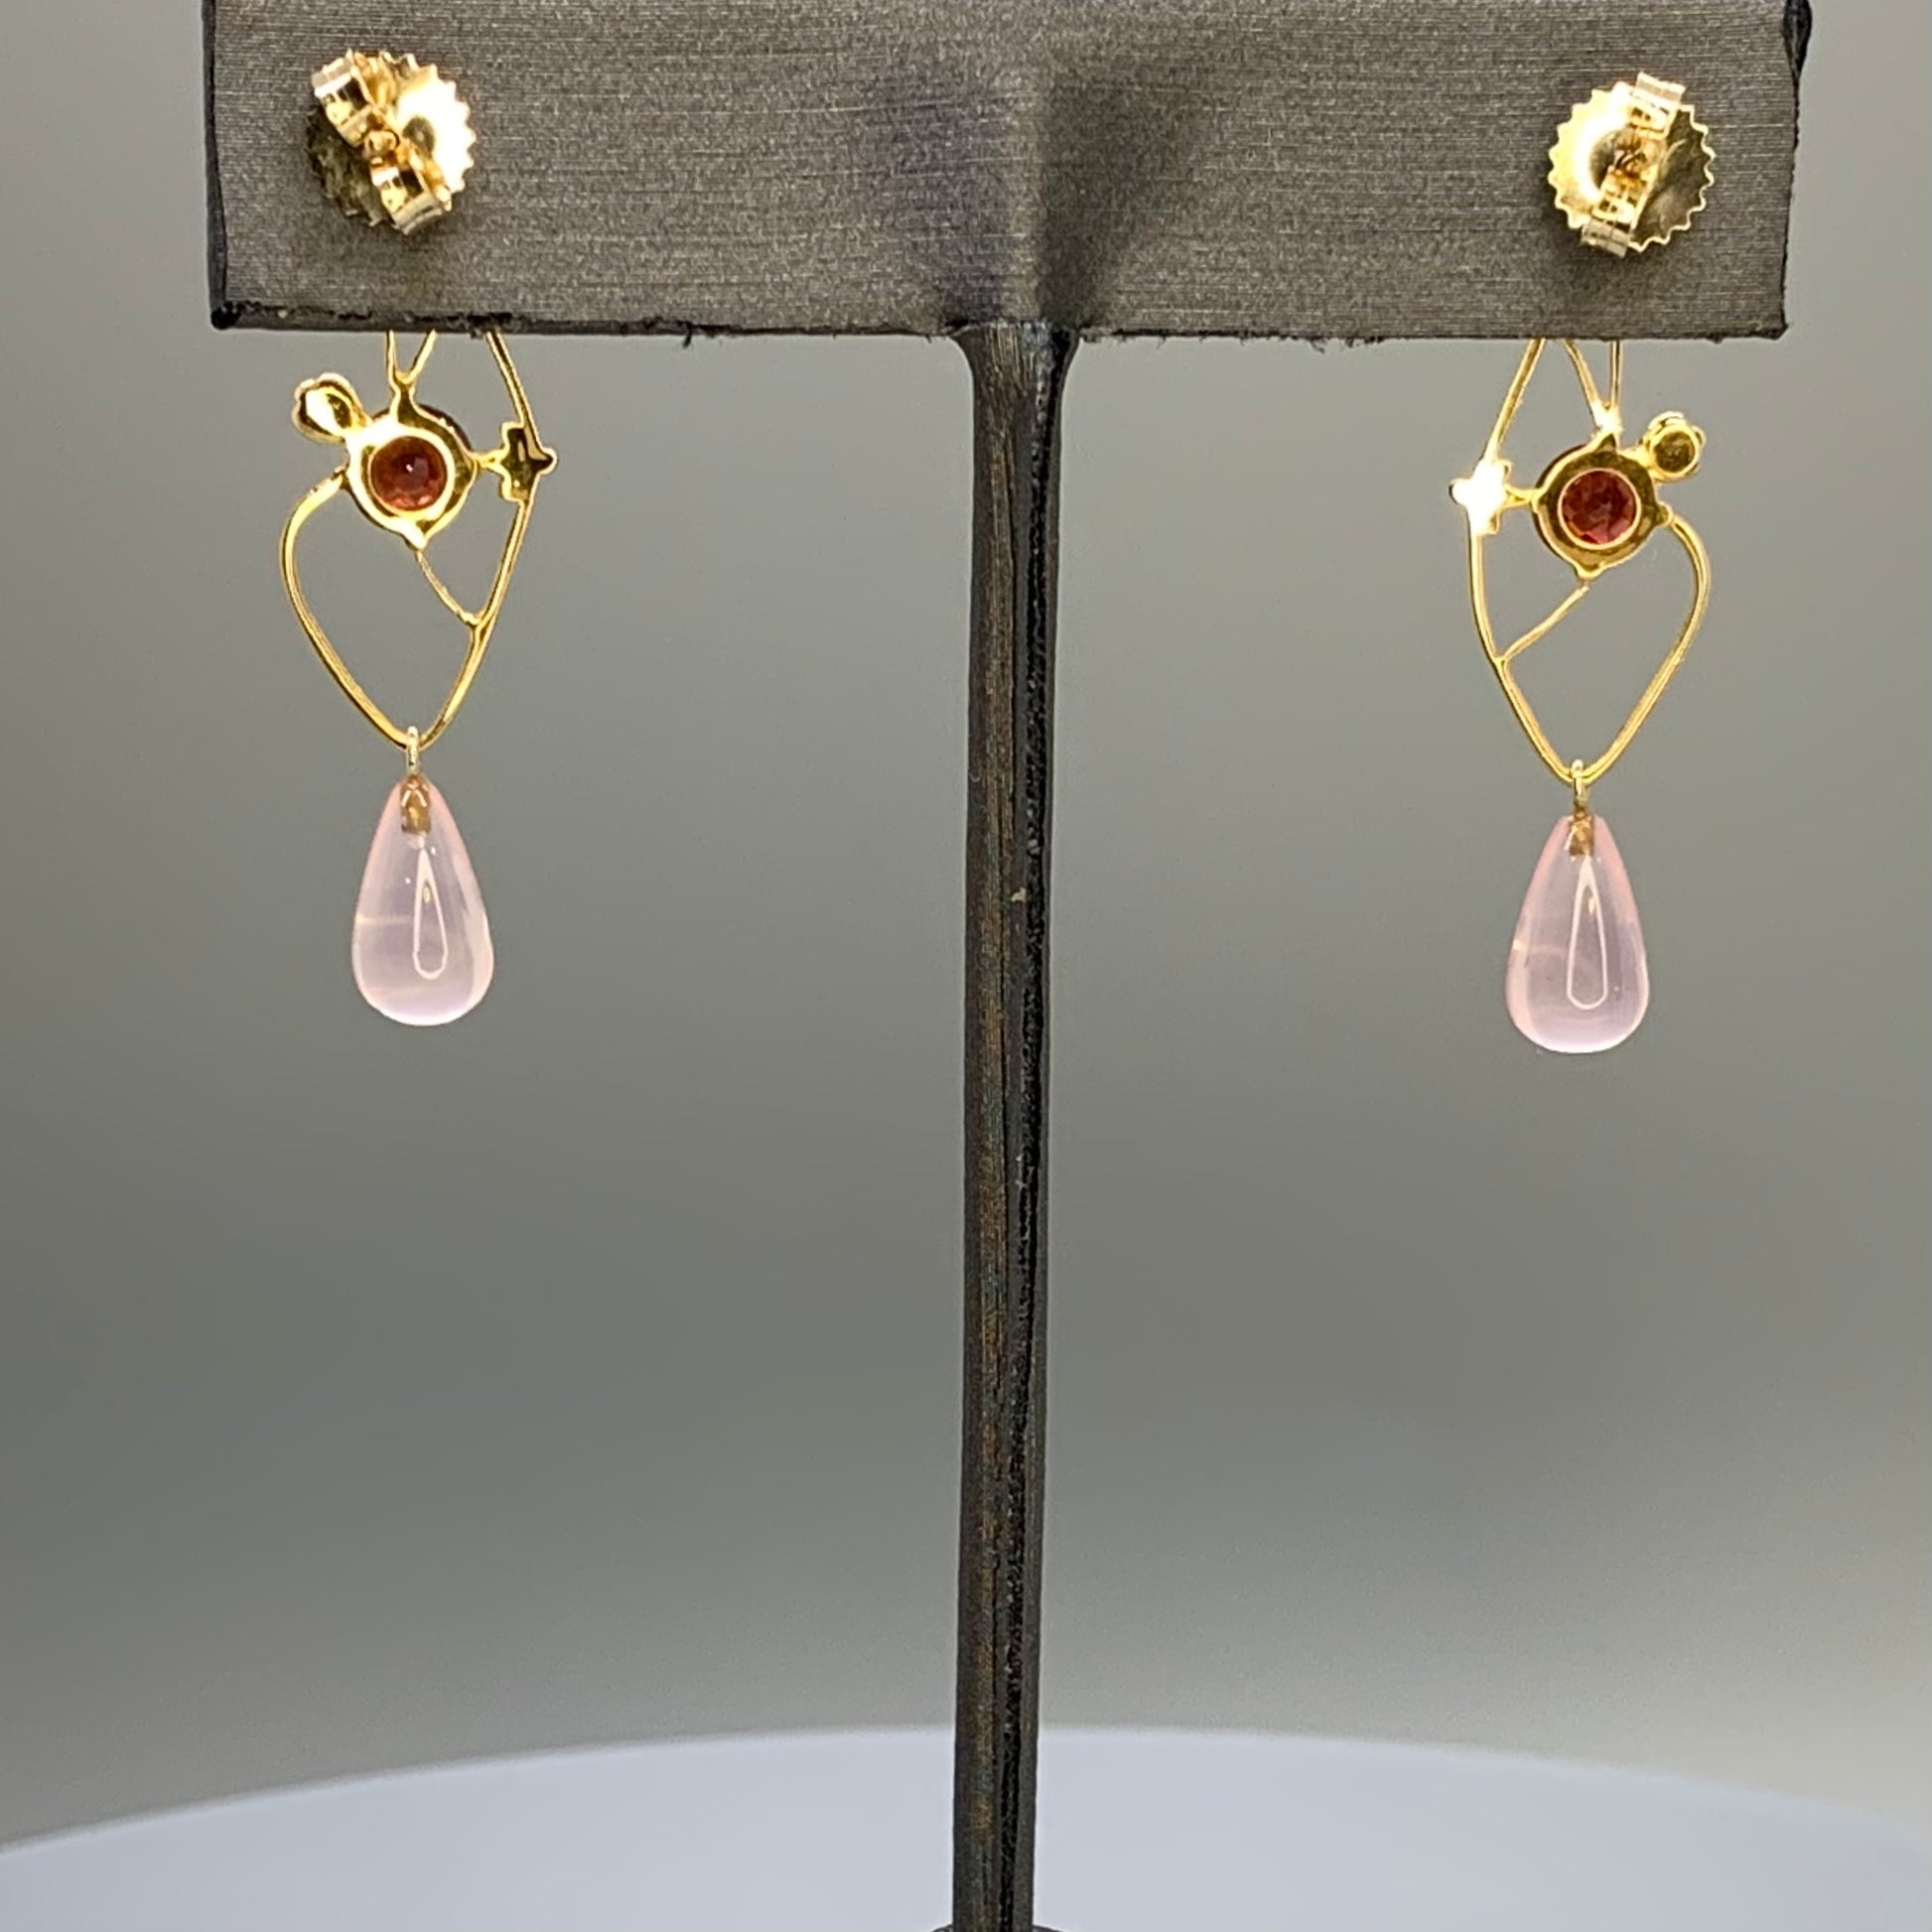 Back view of earrings, showing post and well fitting nut, along with open back for the garnet gemstones and wire work.